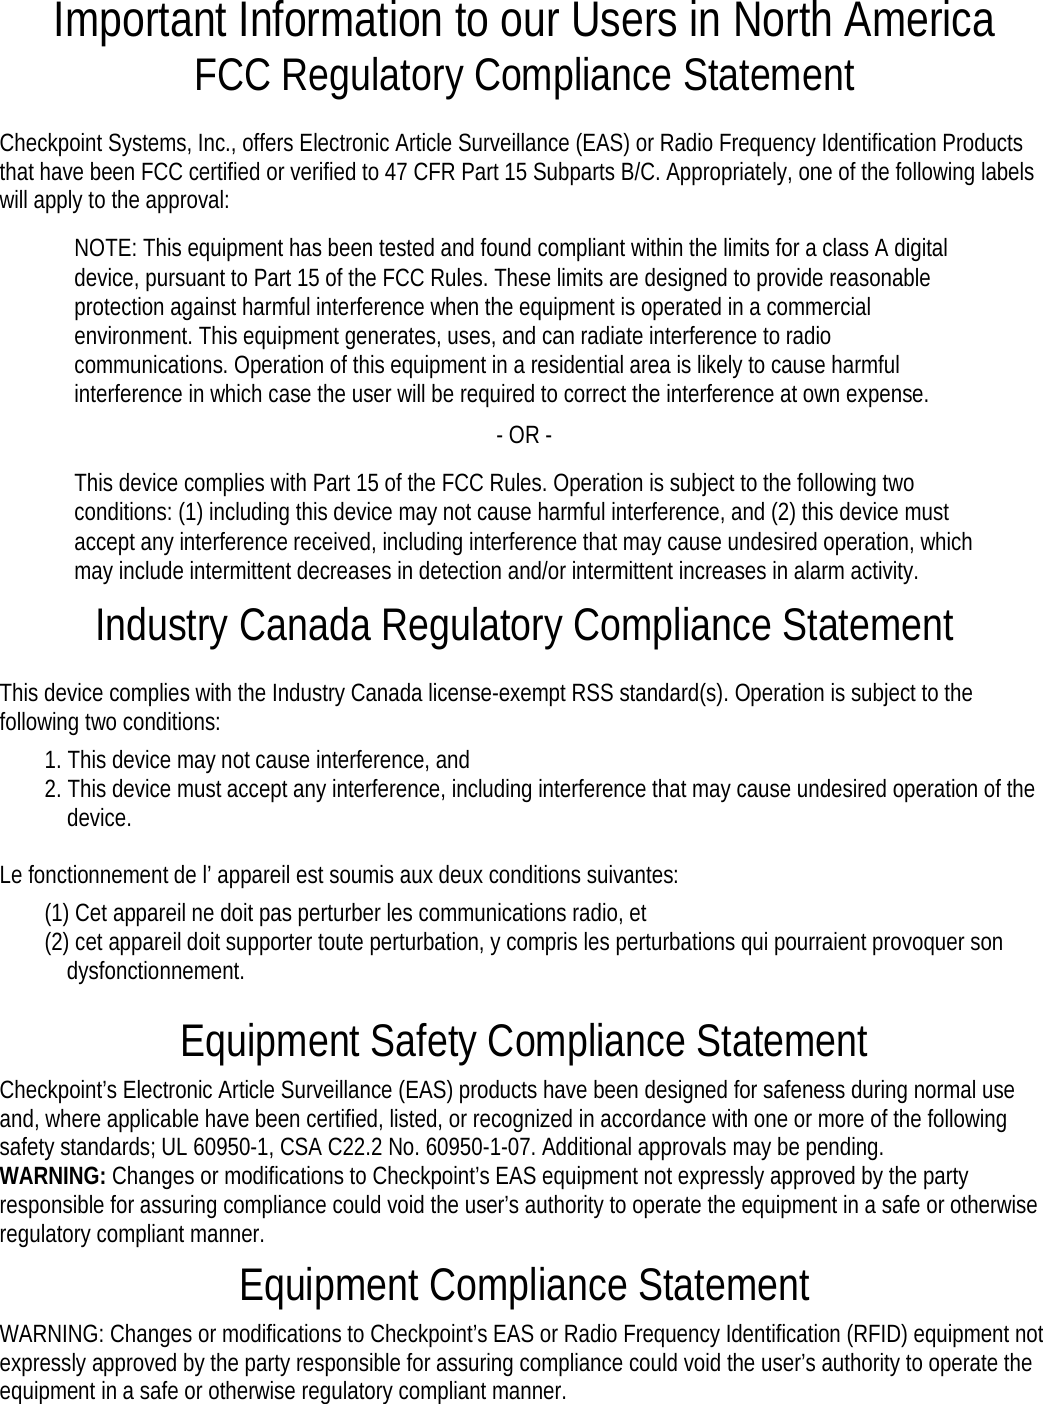 Important Information to our Users in North America FCC Regulatory Compliance Statement  Checkpoint Systems, Inc., offers Electronic Article Surveillance (EAS) or Radio Frequency Identification Products that have been FCC certified or verified to 47 CFR Part 15 Subparts B/C. Appropriately, one of the following labels will apply to the approval: NOTE: This equipment has been tested and found compliant within the limits for a class A digital device, pursuant to Part 15 of the FCC Rules. These limits are designed to provide reasonable protection against harmful interference when the equipment is operated in a commercial environment. This equipment generates, uses, and can radiate interference to radio communications. Operation of this equipment in a residential area is likely to cause harmful interference in which case the user will be required to correct the interference at own expense. - OR - This device complies with Part 15 of the FCC Rules. Operation is subject to the following two conditions: (1) including this device may not cause harmful interference, and (2) this device must accept any interference received, including interference that may cause undesired operation, which may include intermittent decreases in detection and/or intermittent increases in alarm activity. Industry Canada Regulatory Compliance Statement  This device complies with the Industry Canada license-exempt RSS standard(s). Operation is subject to the following two conditions:  1. This device may not cause interference, and   2. This device must accept any interference, including interference that may cause undesired operation of the device.  Le fonctionnement de l’ appareil est soumis aux deux conditions suivantes:   (1) Cet appareil ne doit pas perturber les communications radio, et  (2) cet appareil doit supporter toute perturbation, y compris les perturbations qui pourraient provoquer son dysfonctionnement.  Equipment Safety Compliance Statement  Checkpoint’s Electronic Article Surveillance (EAS) products have been designed for safeness during normal use and, where applicable have been certified, listed, or recognized in accordance with one or more of the following safety standards; UL 60950-1, CSA C22.2 No. 60950-1-07. Additional approvals may be pending.  WARNING: Changes or modifications to Checkpoint’s EAS equipment not expressly approved by the party responsible for assuring compliance could void the user’s authority to operate the equipment in a safe or otherwise regulatory compliant manner.  Equipment Compliance Statement  WARNING: Changes or modifications to Checkpoint’s EAS or Radio Frequency Identification (RFID) equipment not expressly approved by the party responsible for assuring compliance could void the user’s authority to operate the equipment in a safe or otherwise regulatory compliant manner.